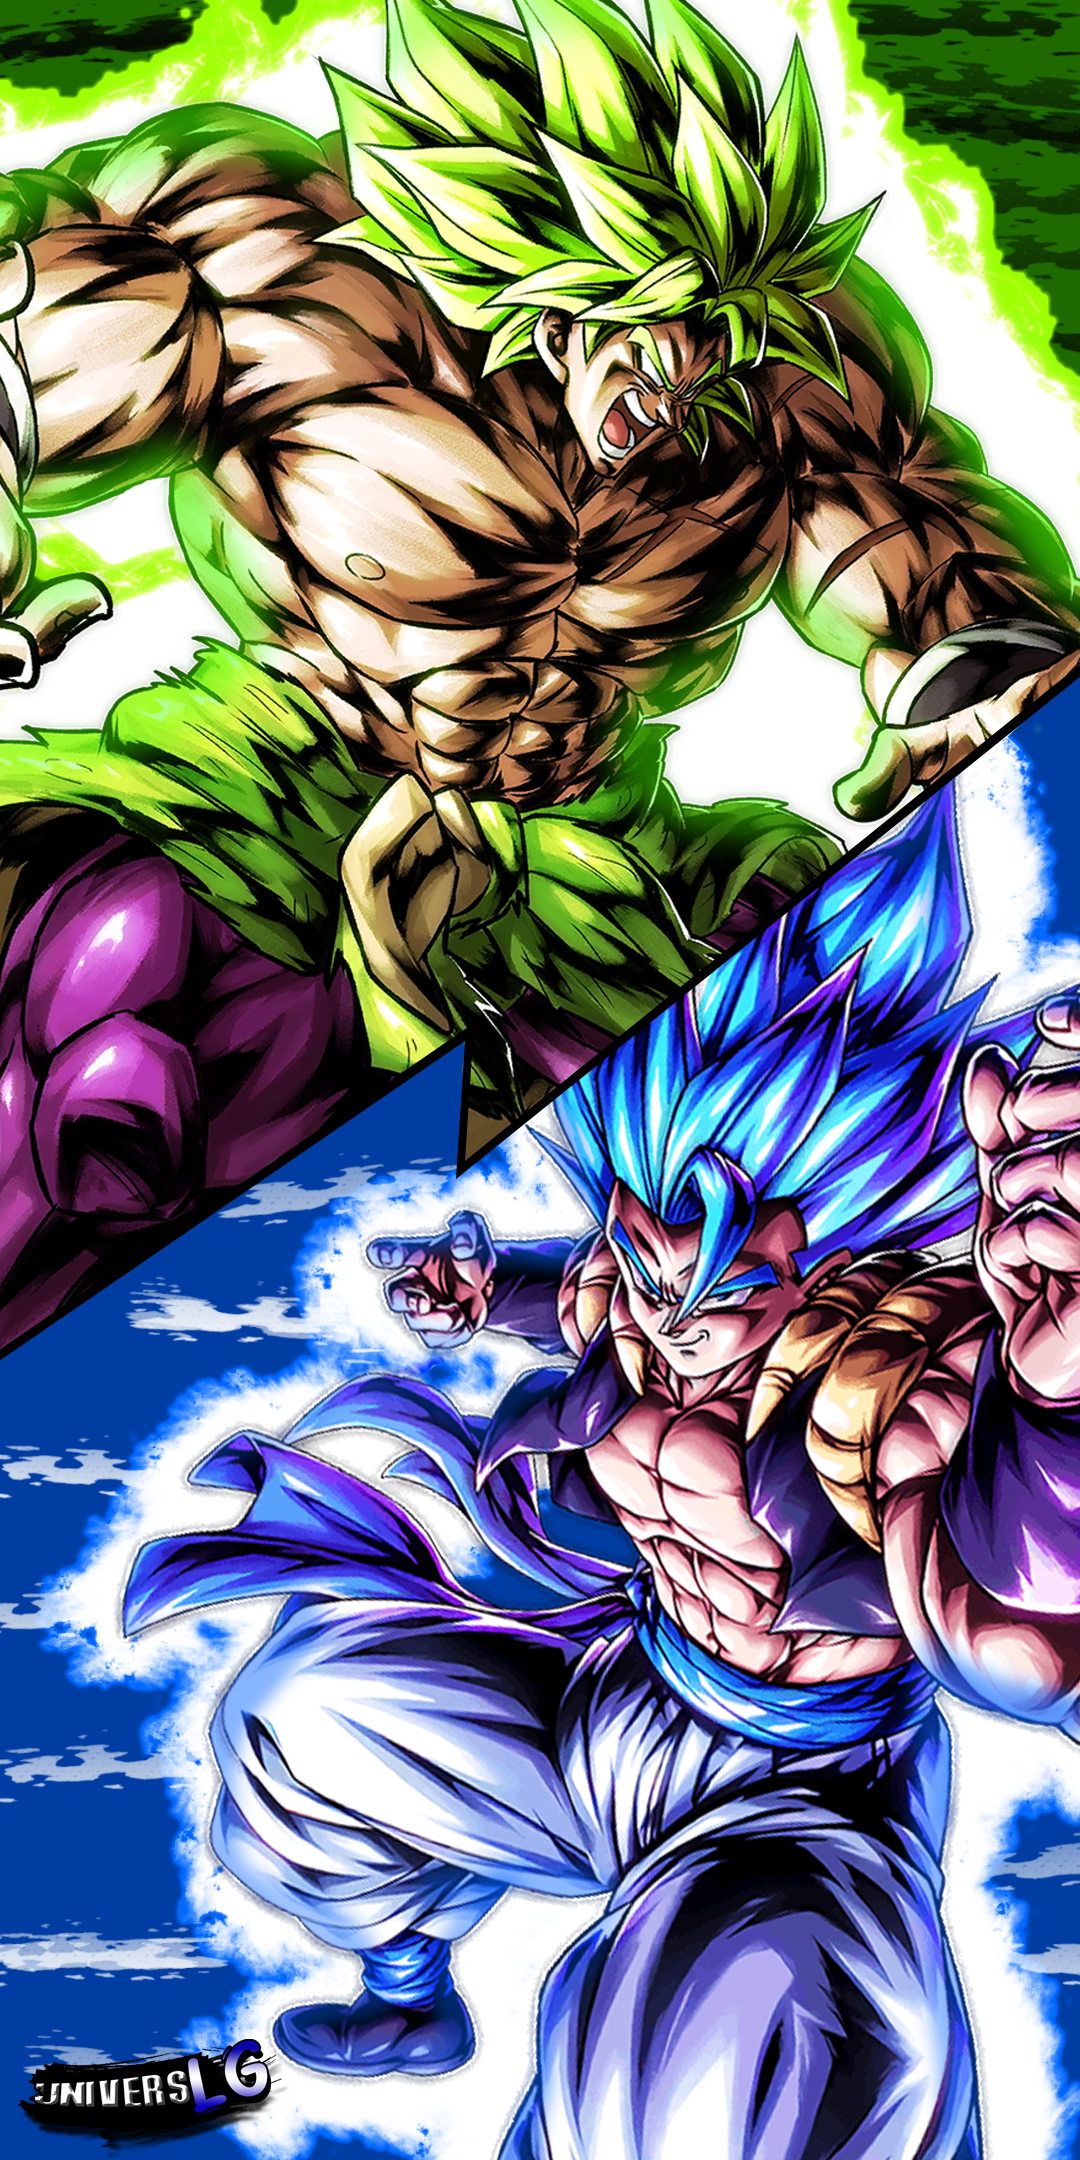 Gogeta vs Broly recreated in DBL. Made by me. : r/DragonballLegends